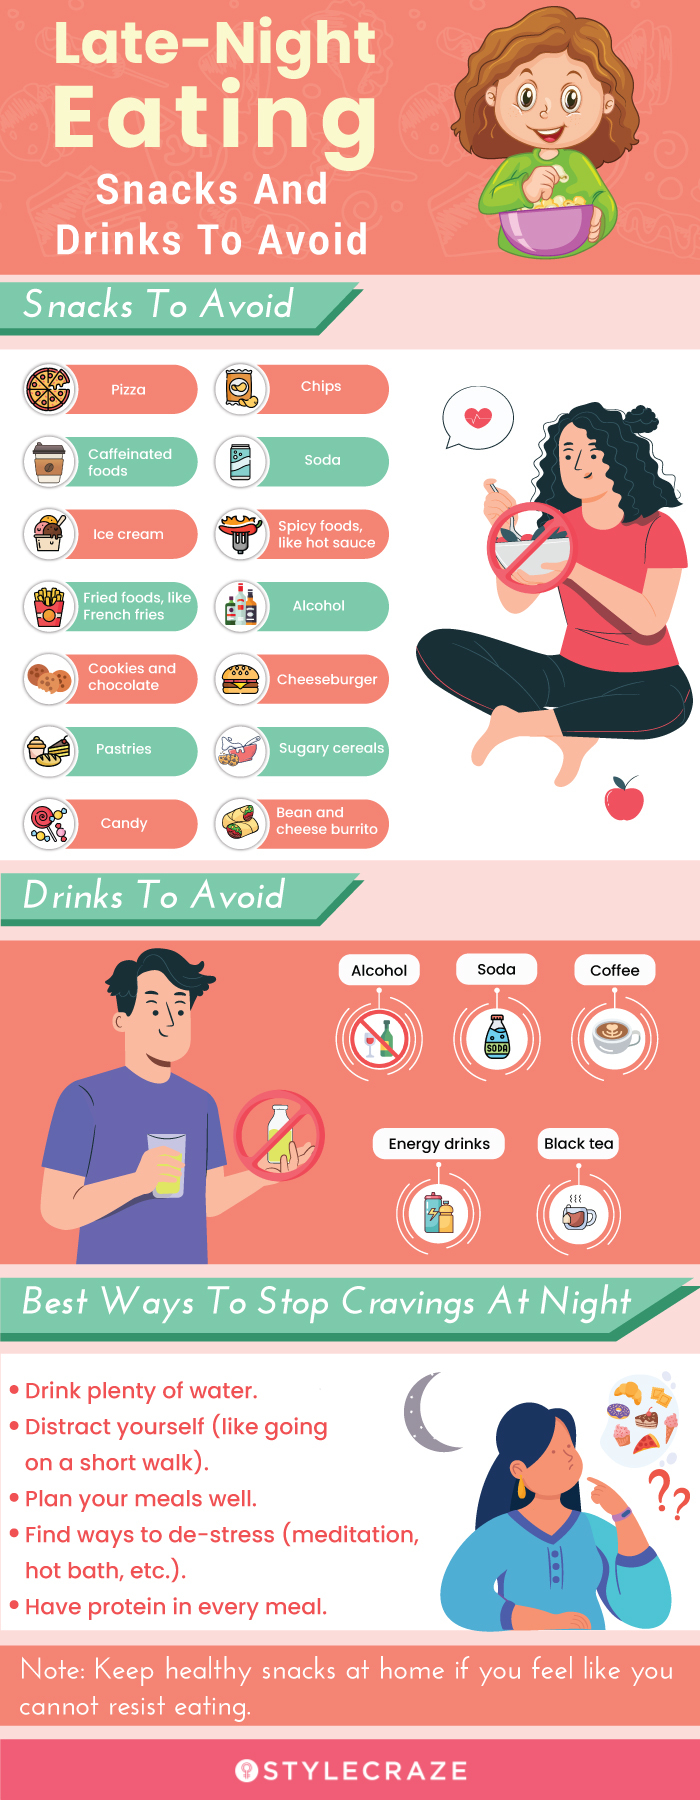 late-night eating snacks and drinks to avoid [infographic]